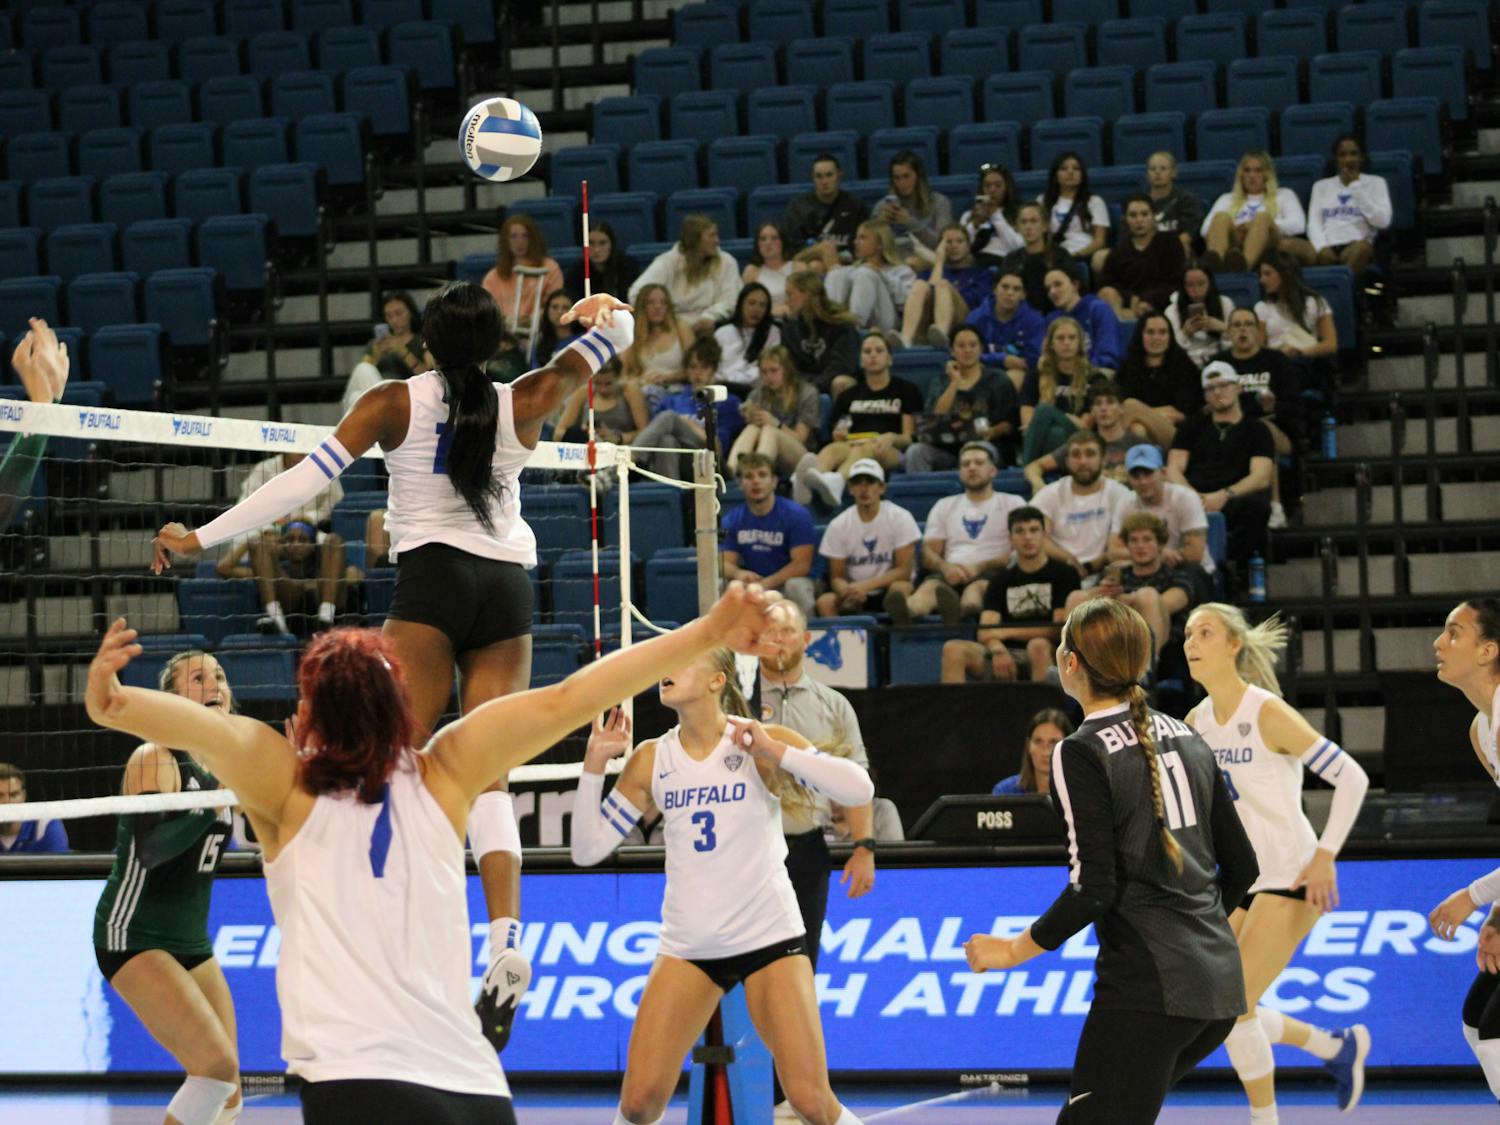 Courtney Okwara goes for the kill in this past weekend's game against Ohio University.